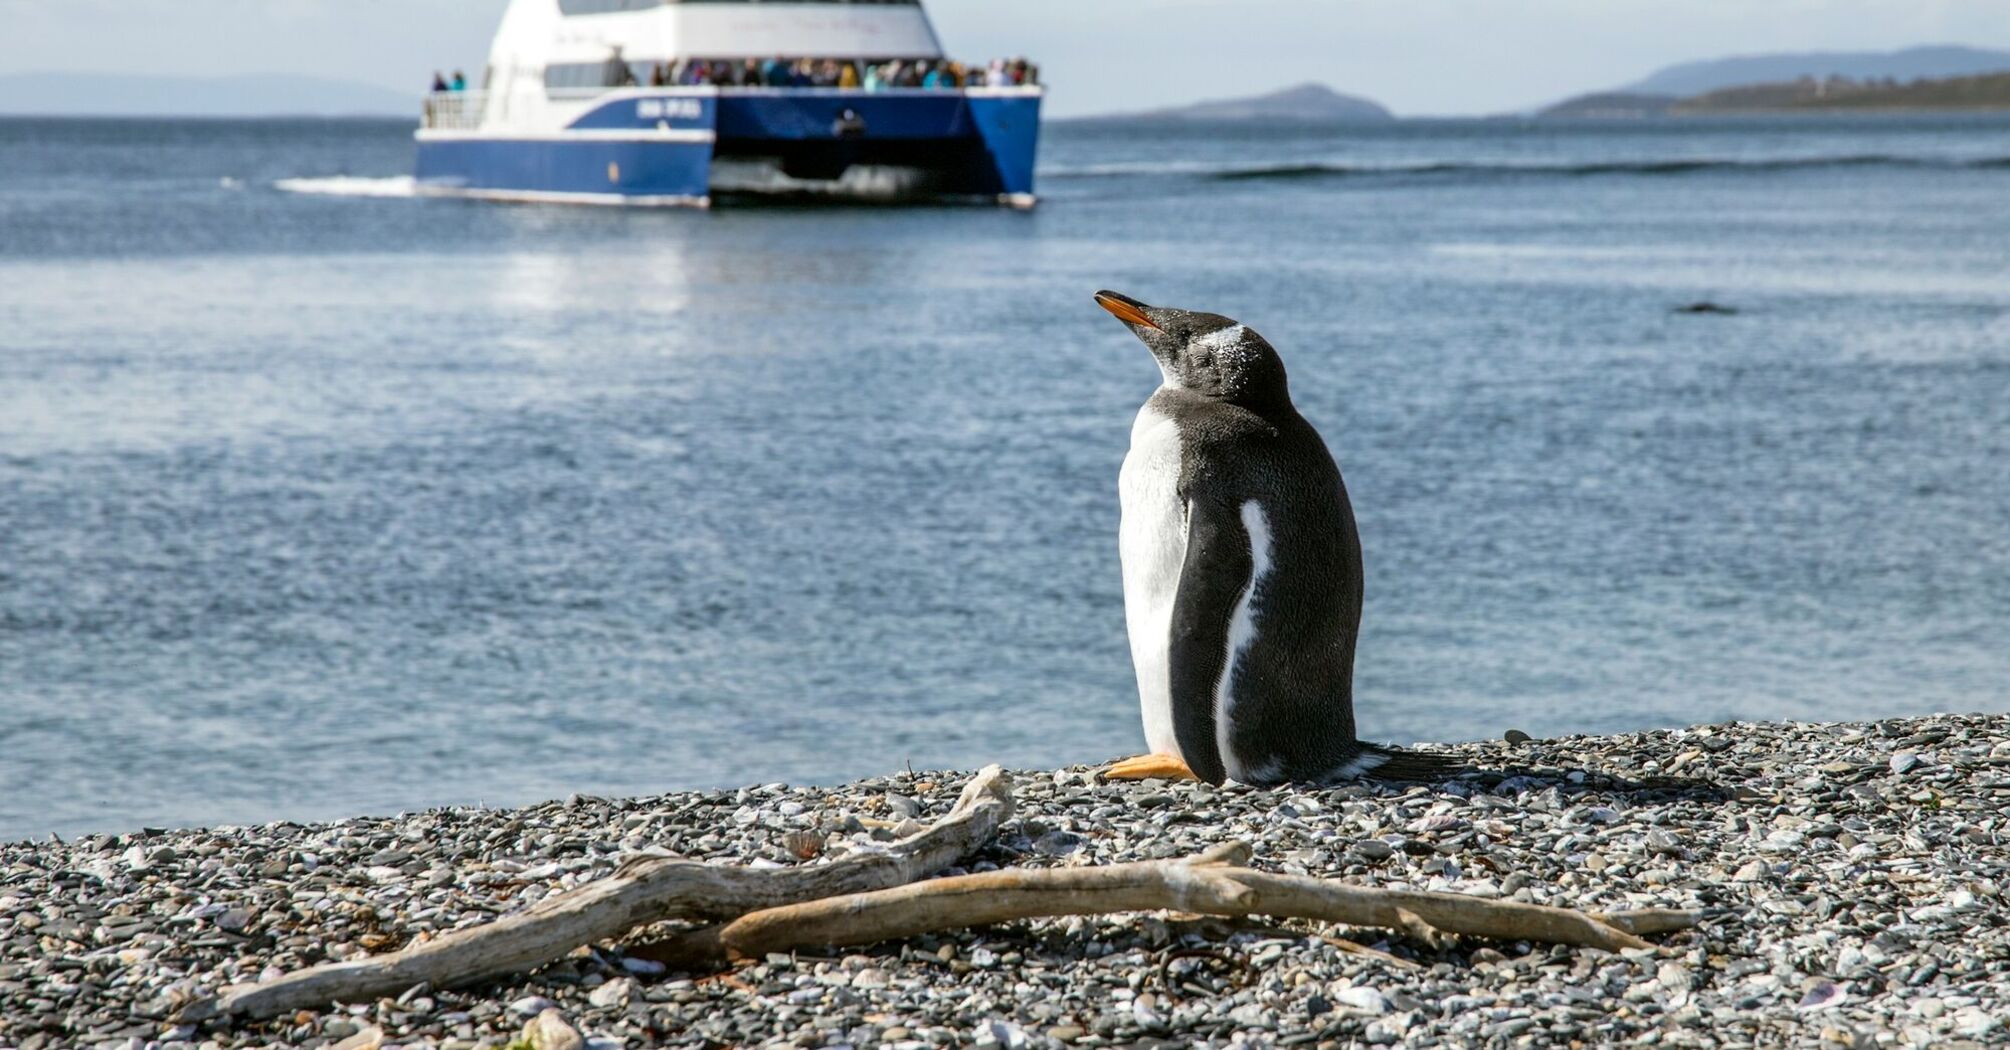 A penguin standing on a pebble beach with a tourist ship in the background